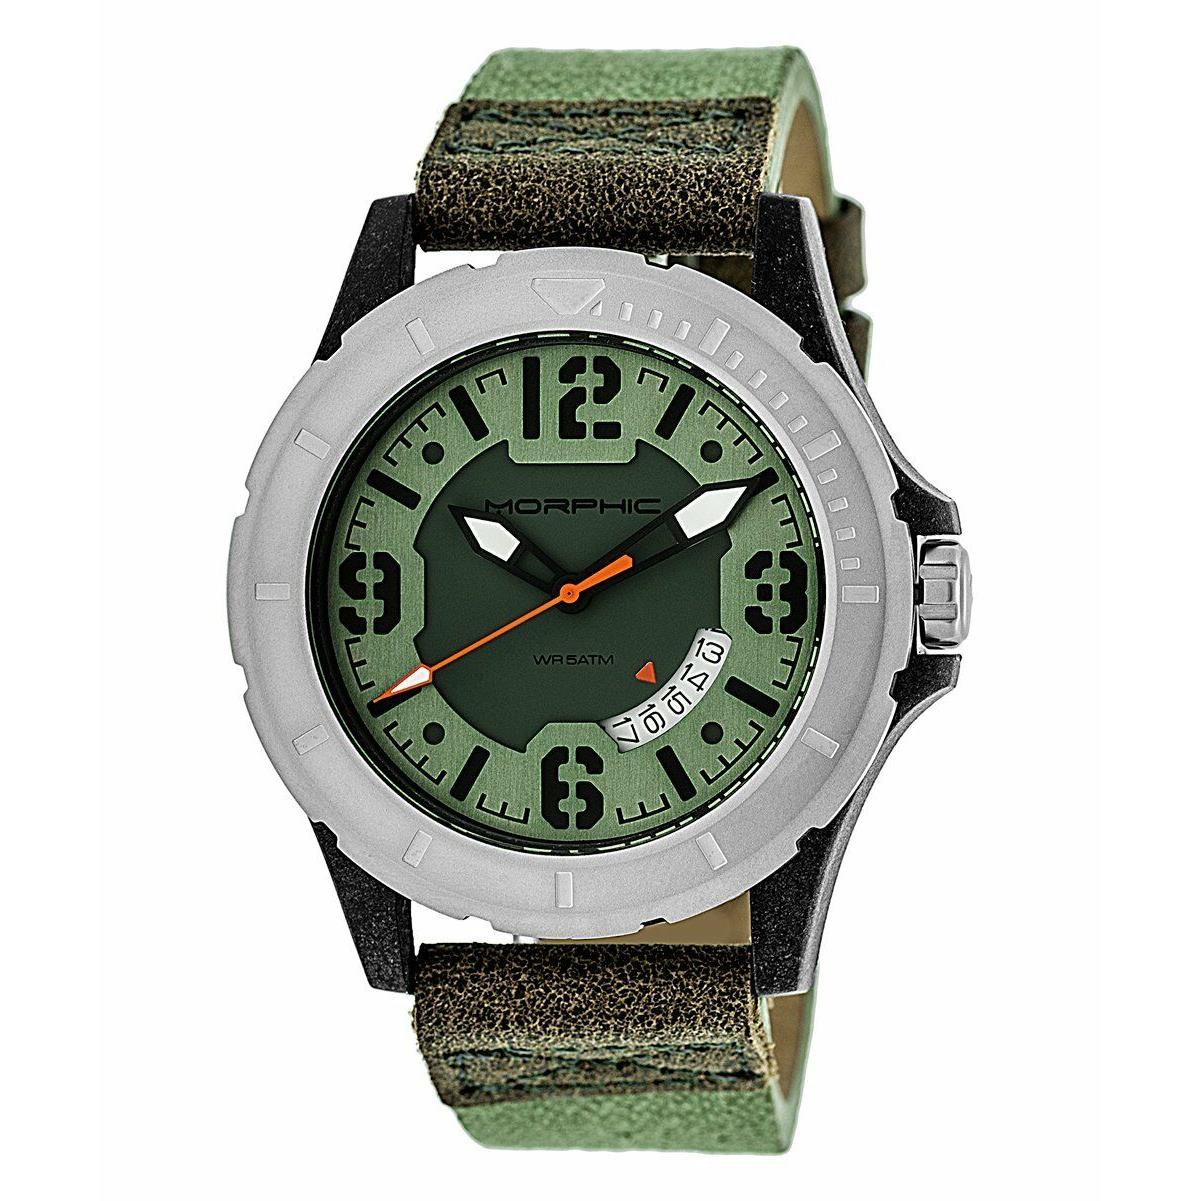 Morphic M47 Series Date Watch Leather Camo Green Olive